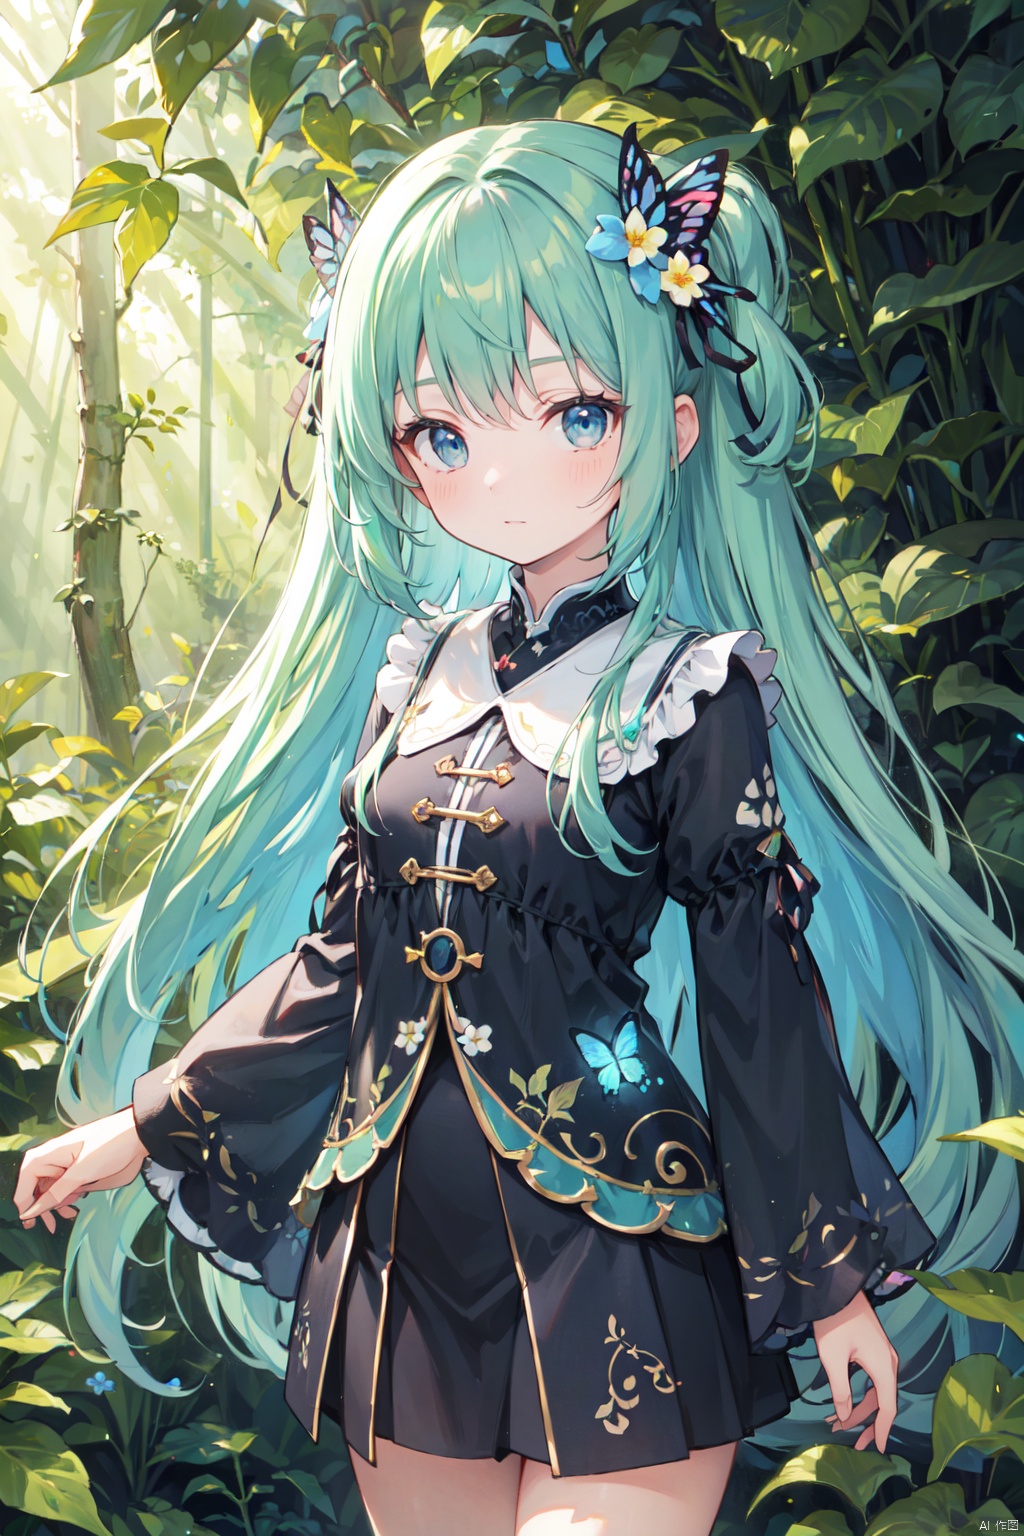  1 girl, surrounded by big leaf plants, wearing flower accessories, (Old-growth forest), (long hair) puberty, young girl, bright outline,Butterfly Dance,surrealistic,tuyawang, senlin